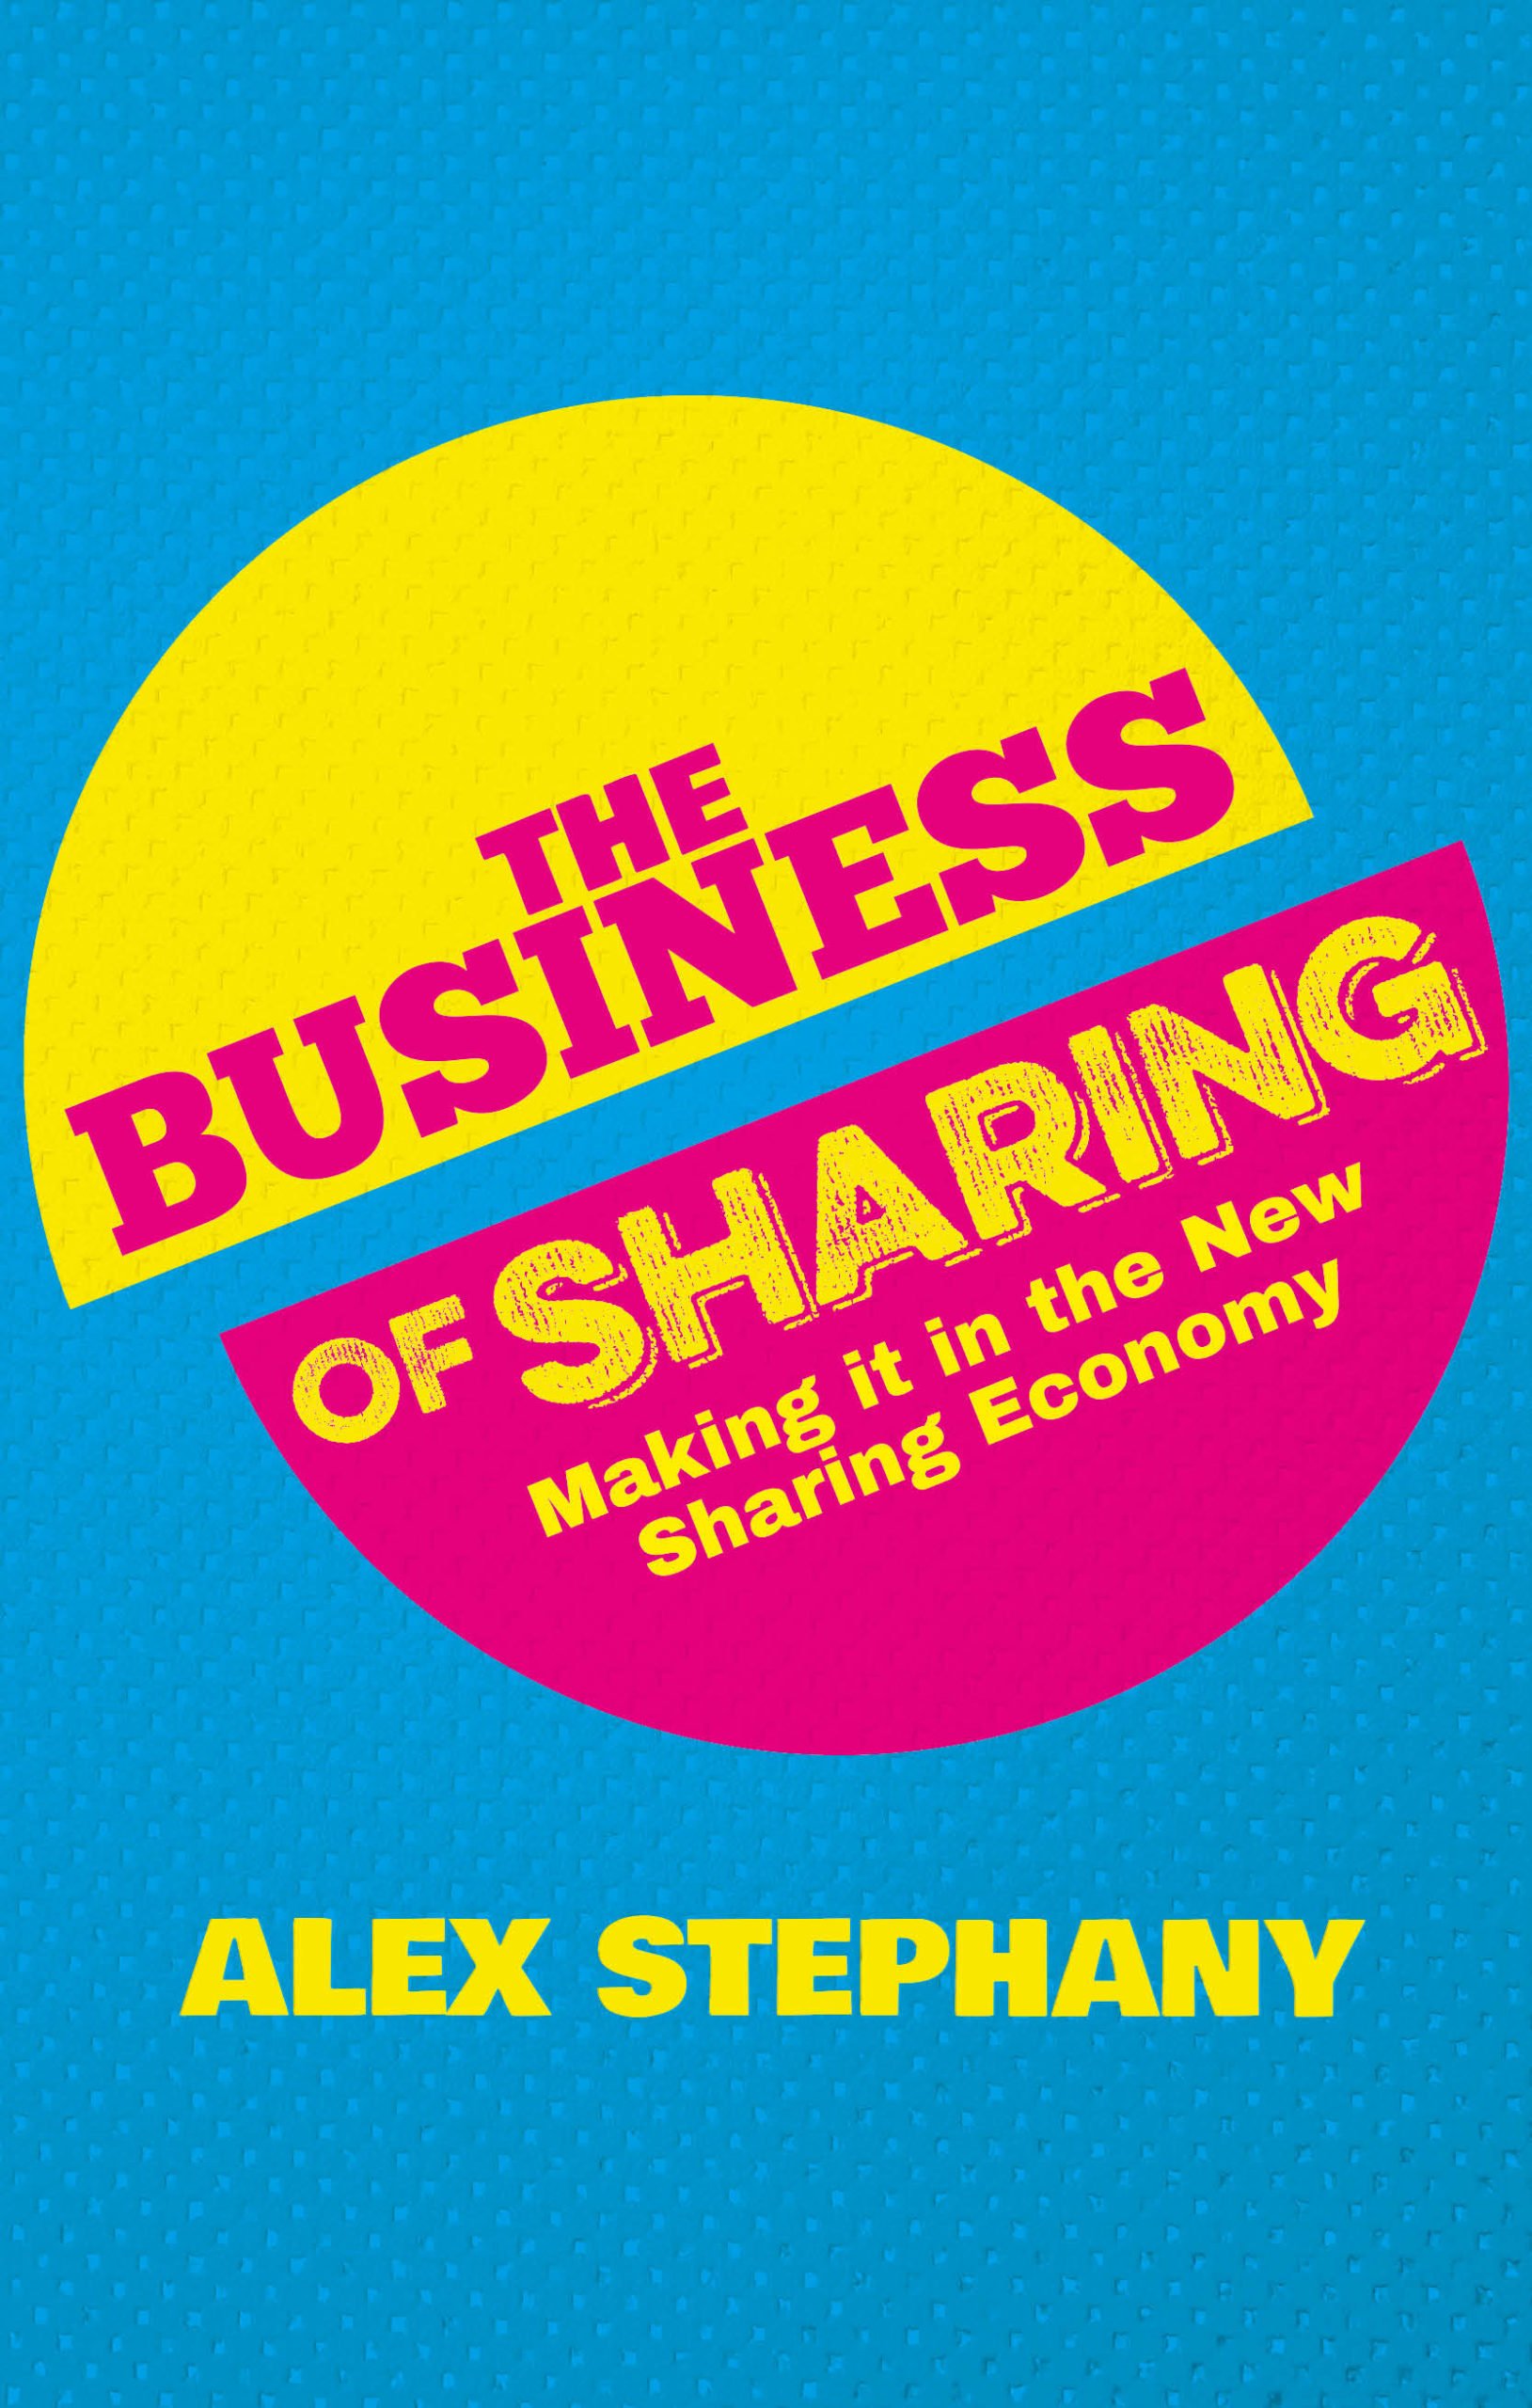 The Business of Sharing: Making it in the New Sharing Economy